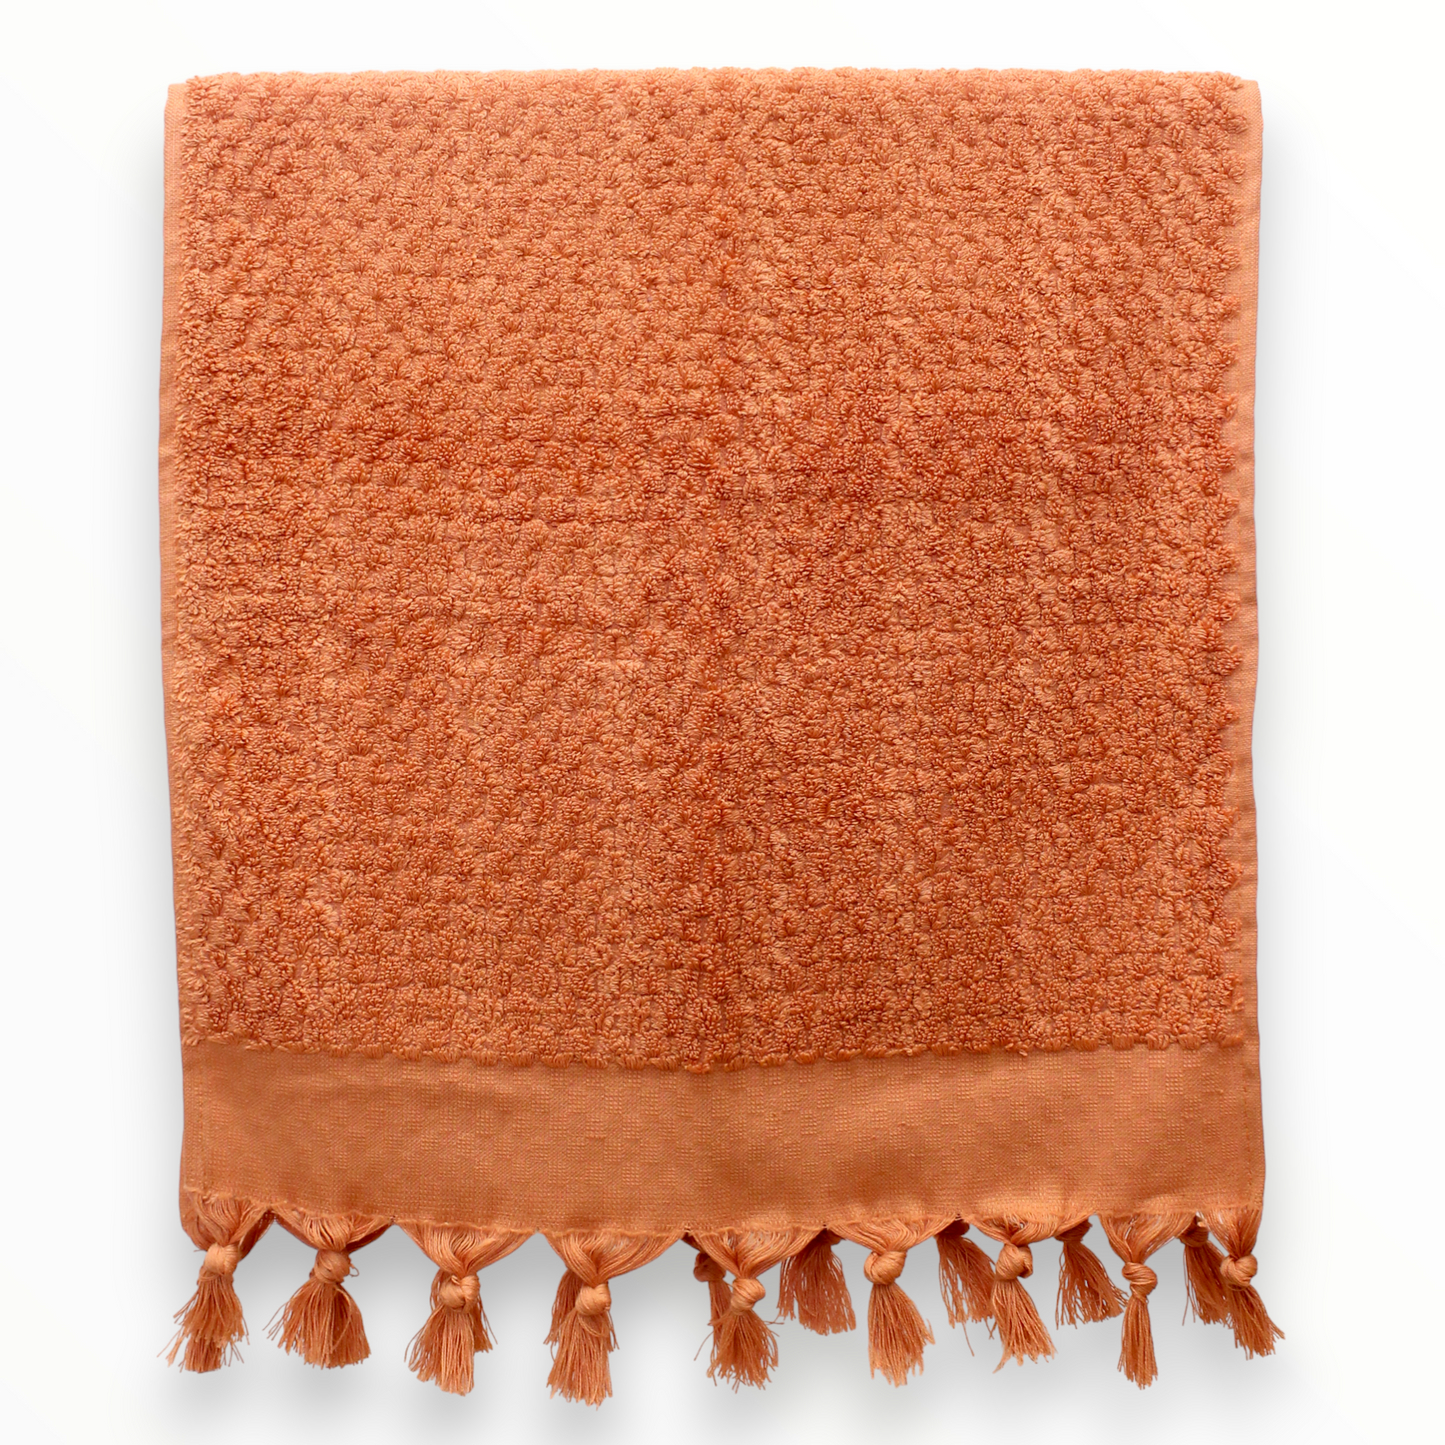 Elegant Natural Cotton Hand-Woven Turkish Terry Hand Towel